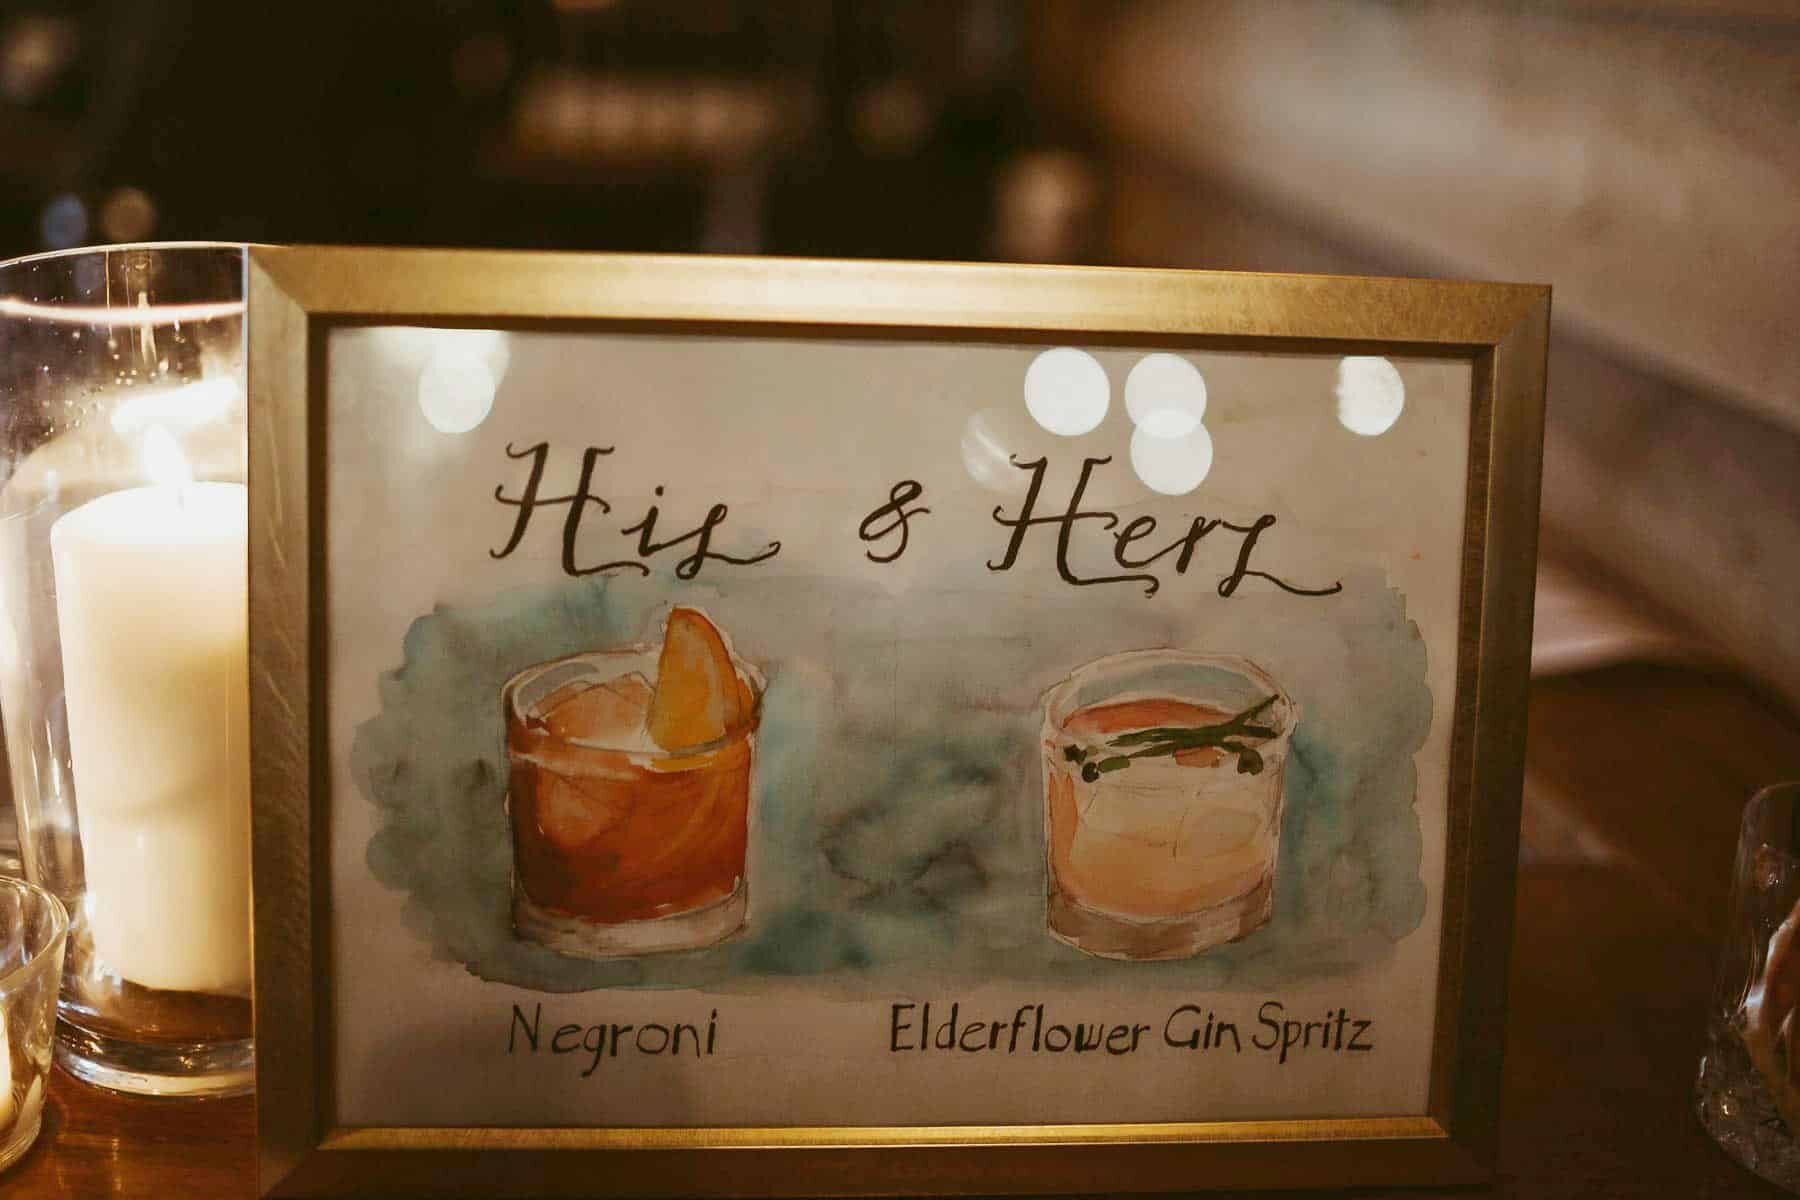 his and hers wedding cocktails